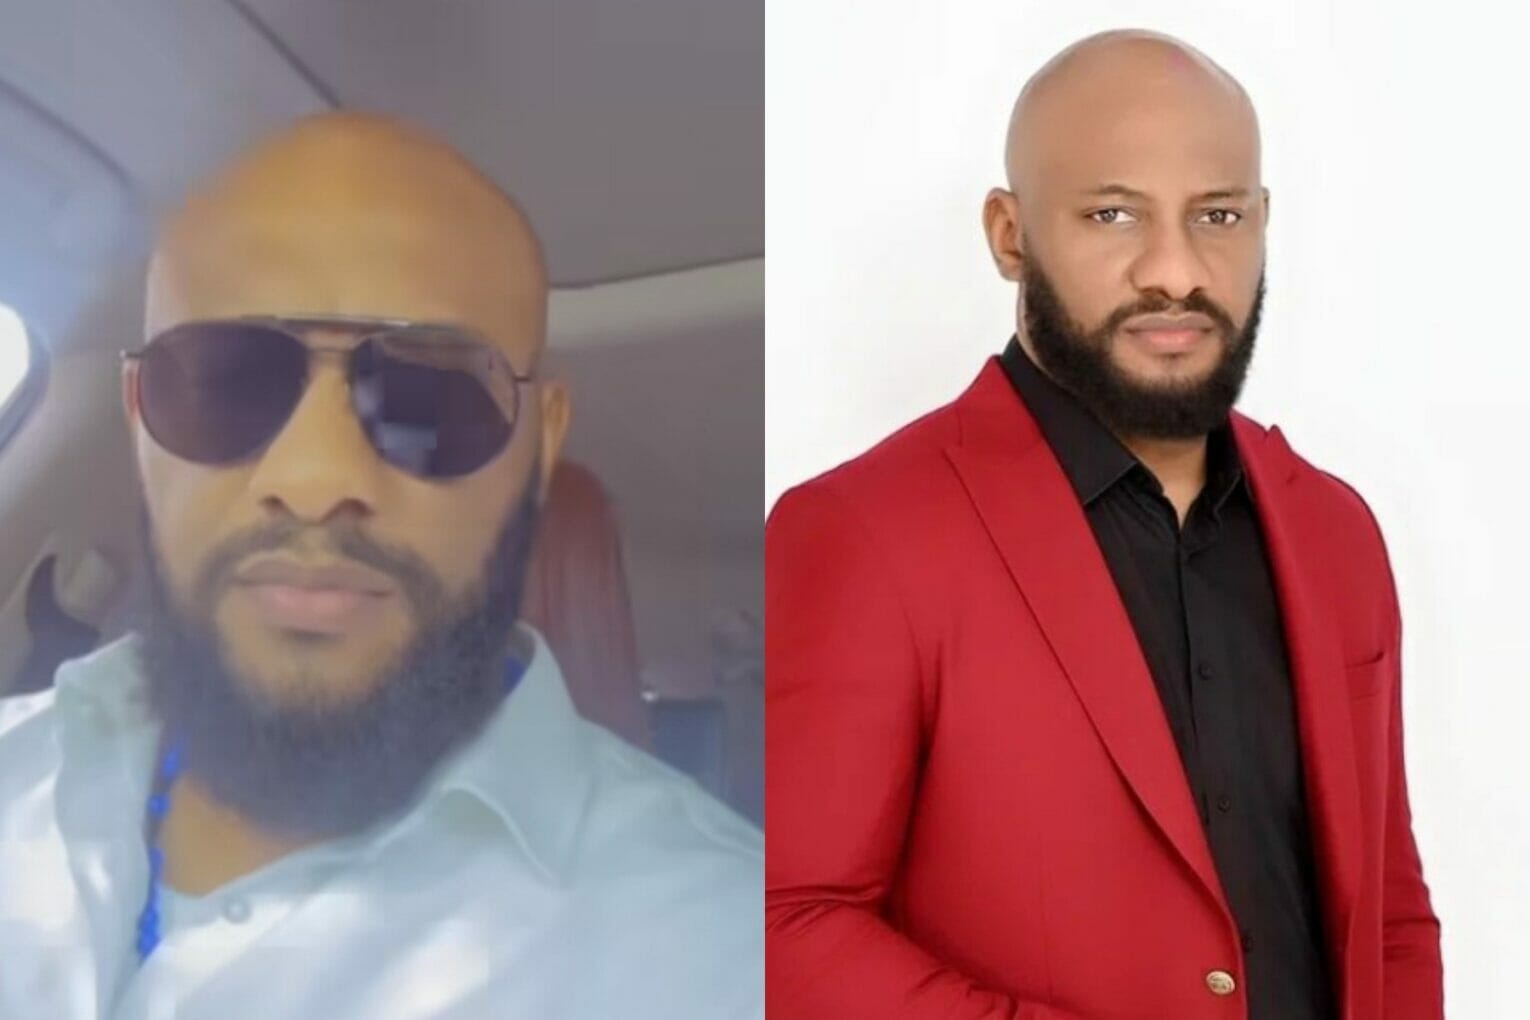 Yul Edochie advises against witches and demons